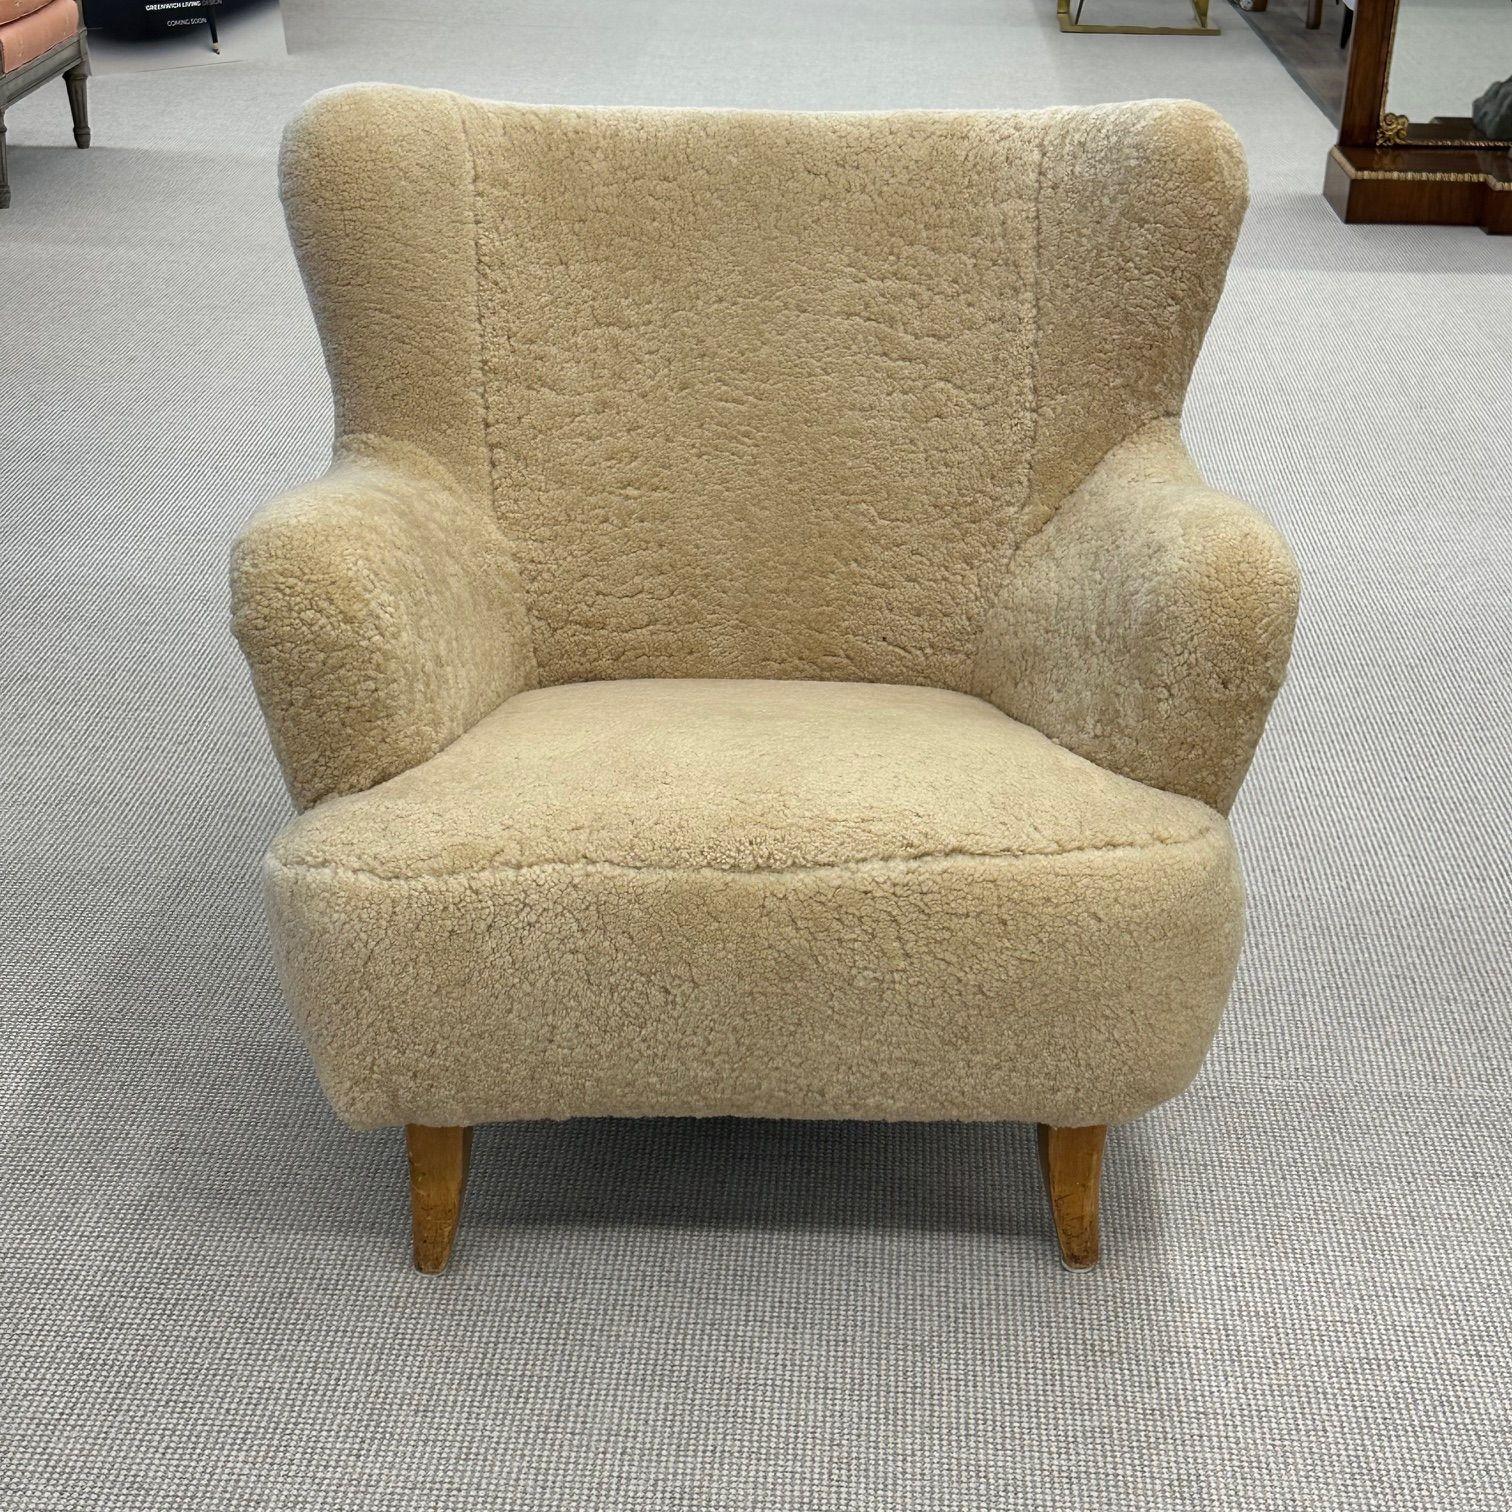 Ilmari Lappalainen, Asko, Finnish Mid-Century Modern, Lounge Chair, Shearling, Lacquered Wood

A 'Laila' armchair designed by Ilmari Lappalainen for Asko in Finland circa 1950s. The upper has been newly upholstered in a genuine honey sheepskin and